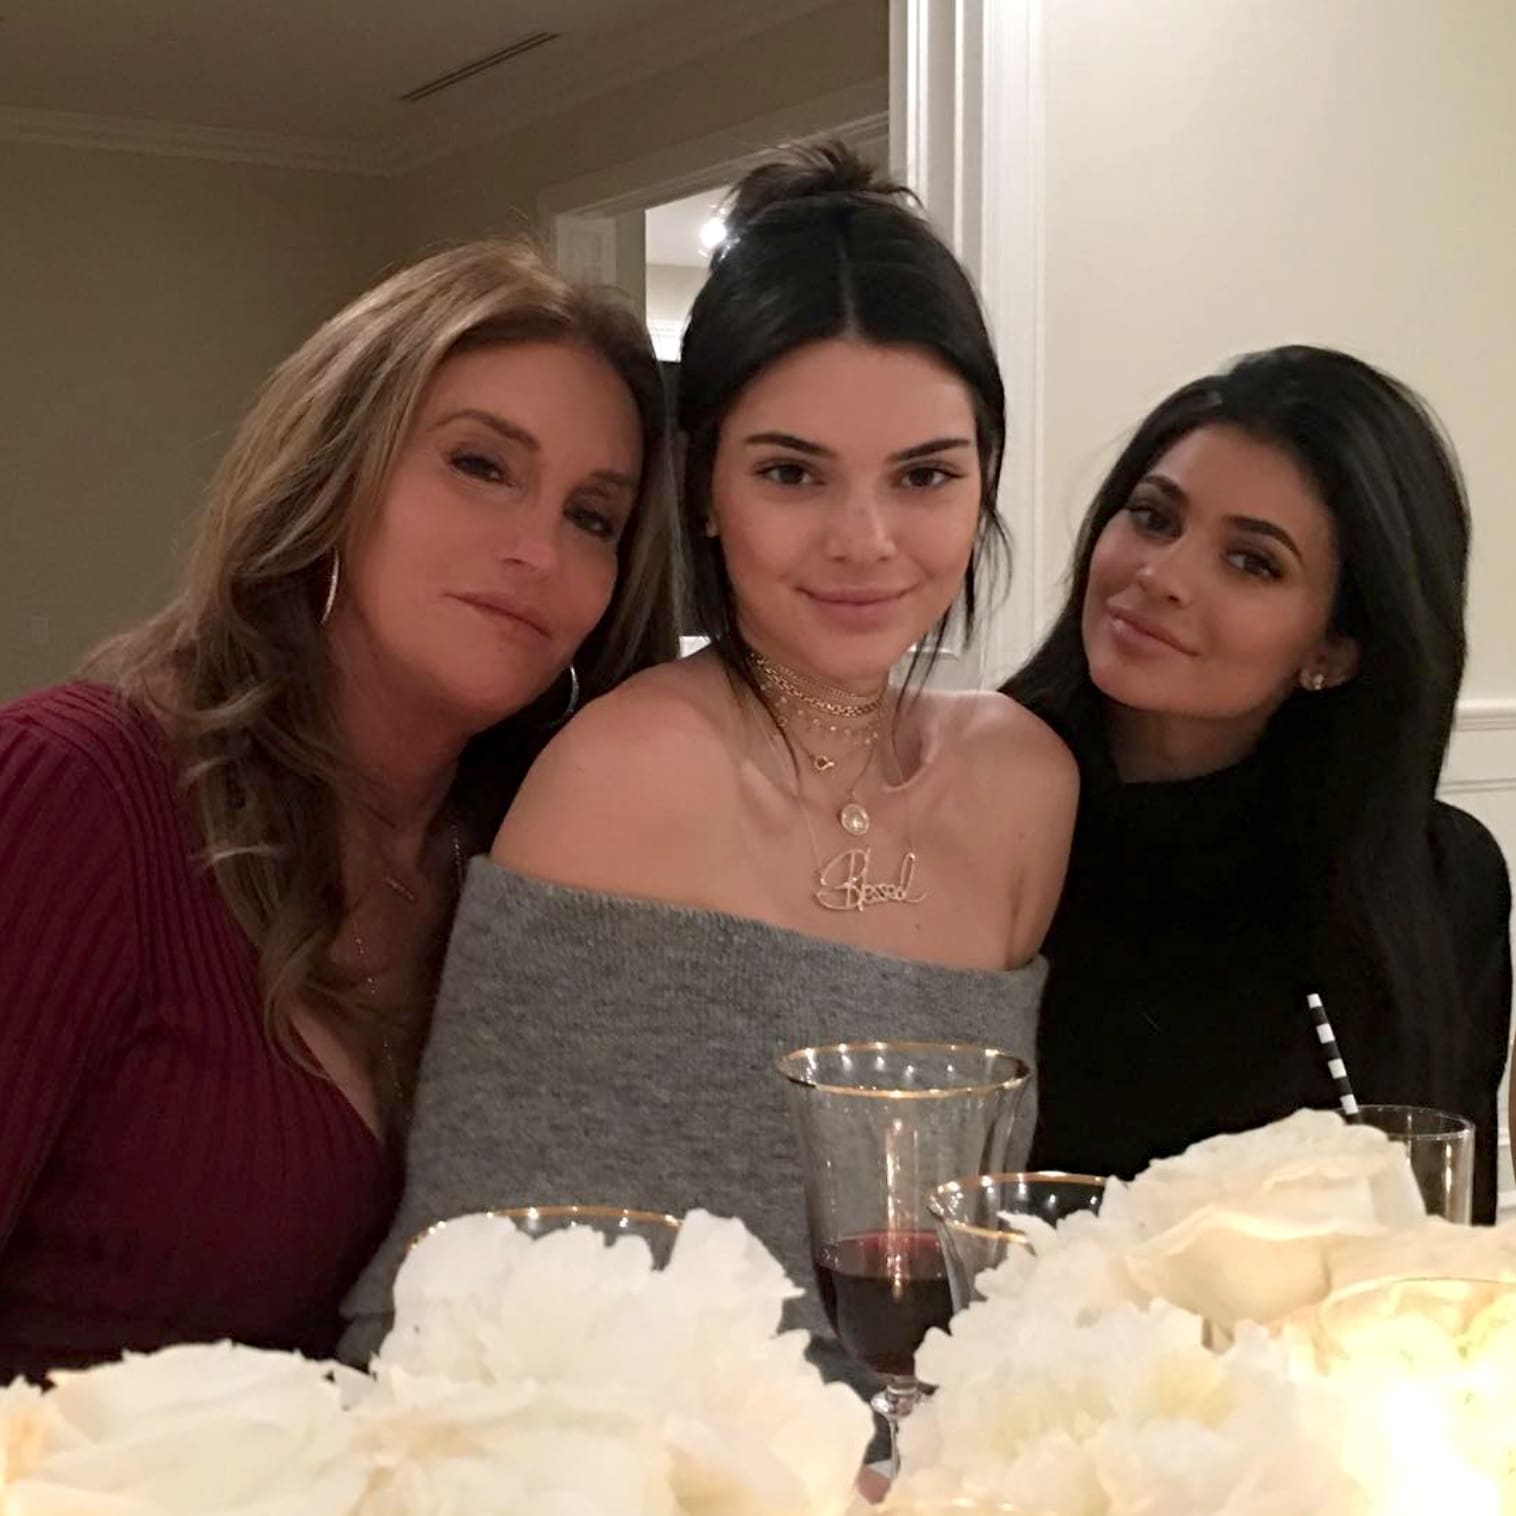 KUWK Caitlyn Jenner Mistakes Daughter Kendall For Kylie In Birthday